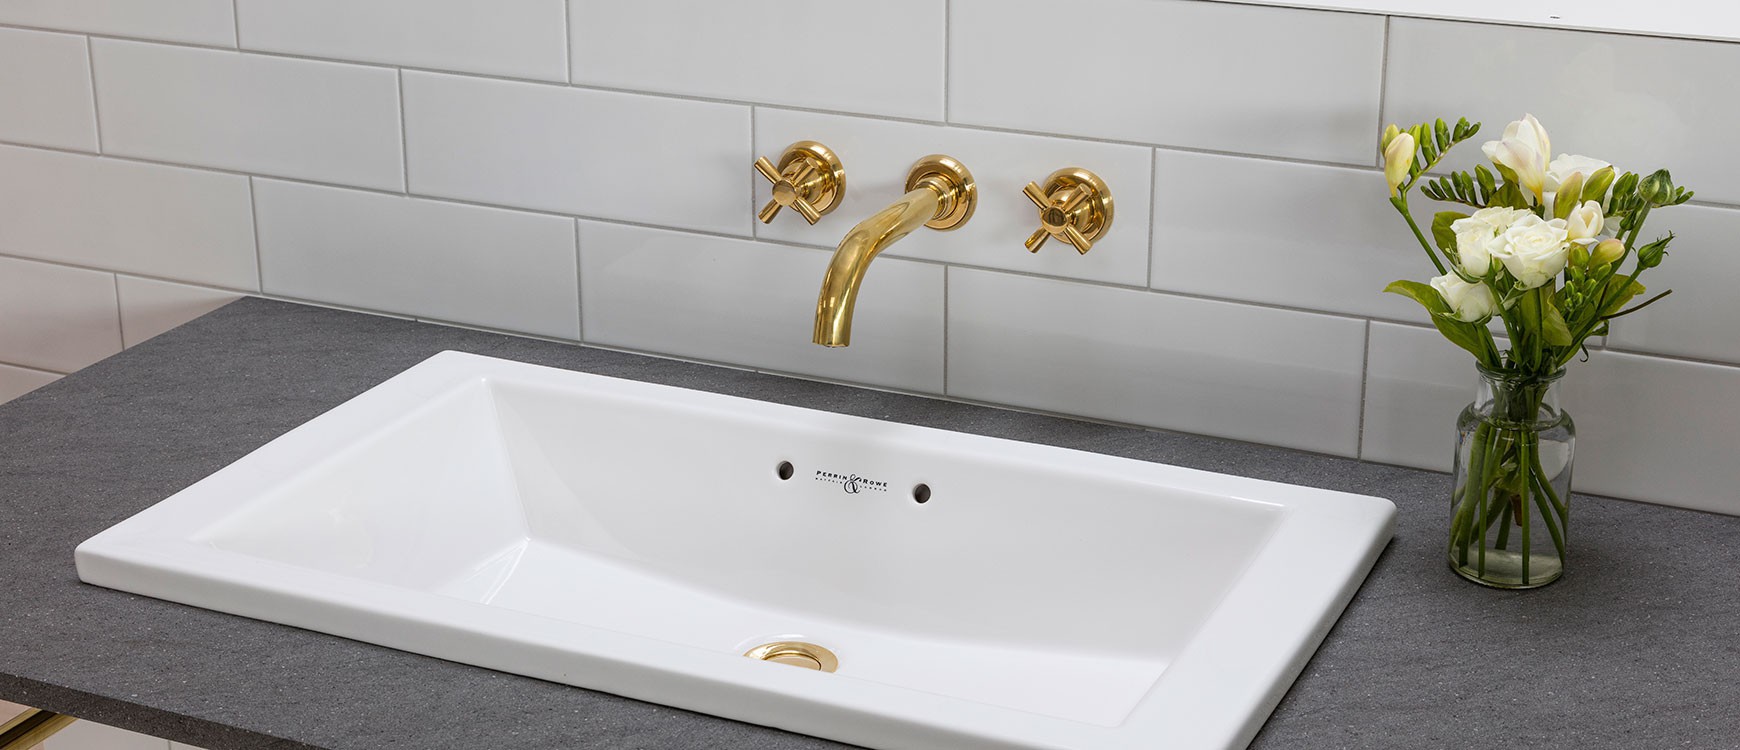 3 Essential things to consider before choosing tapware for your bathroom